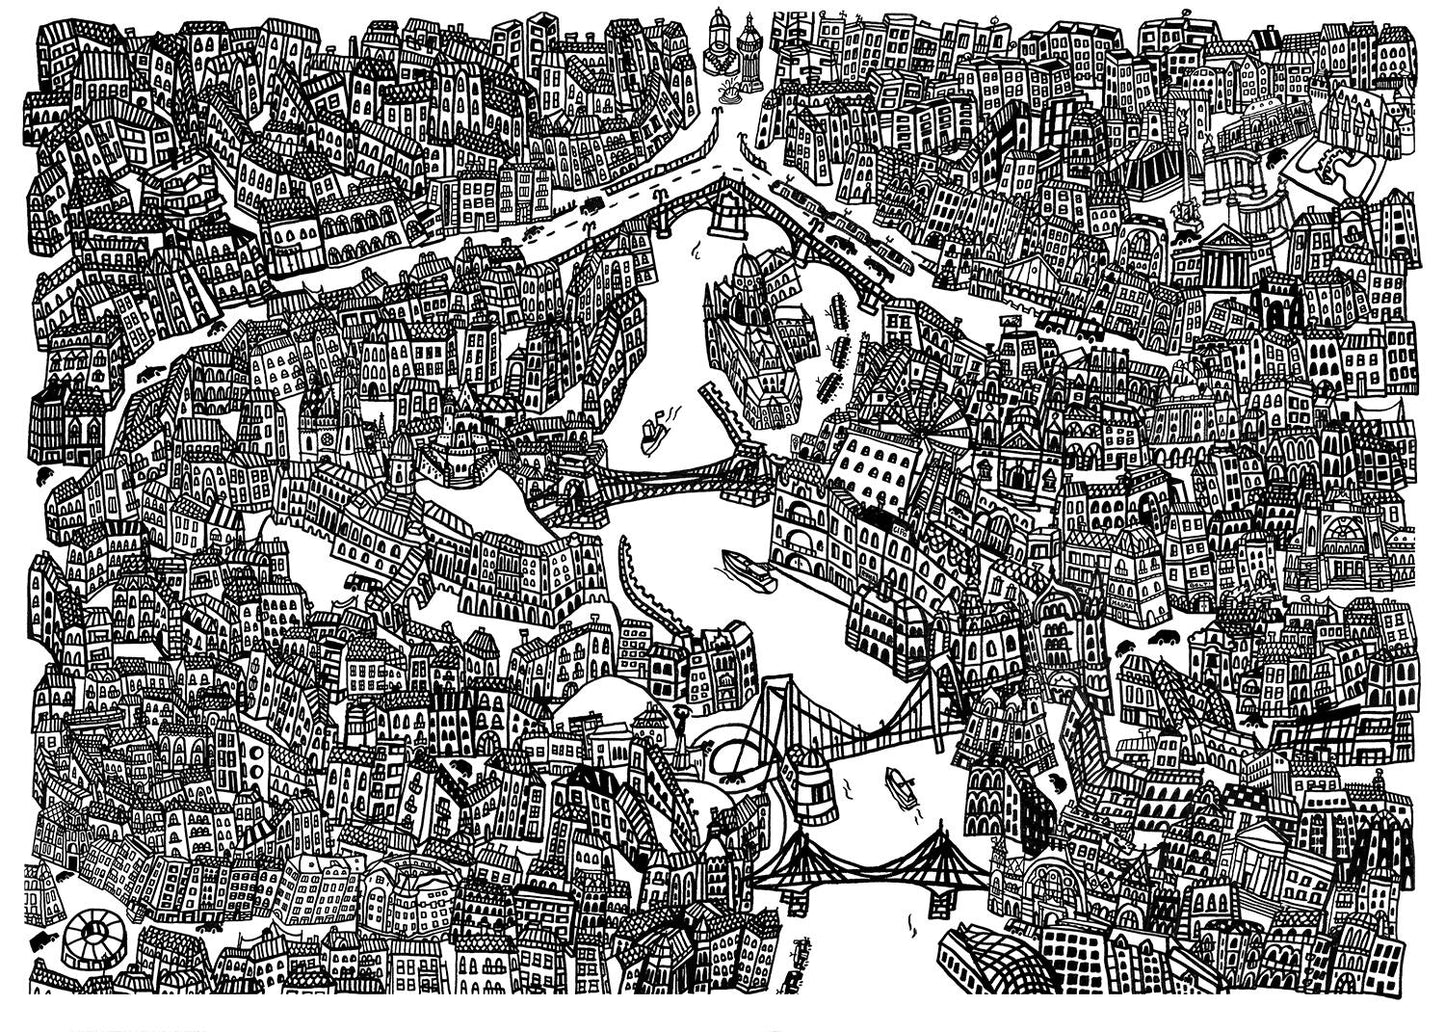 Tiny city of colour - Budapest colouring print - large